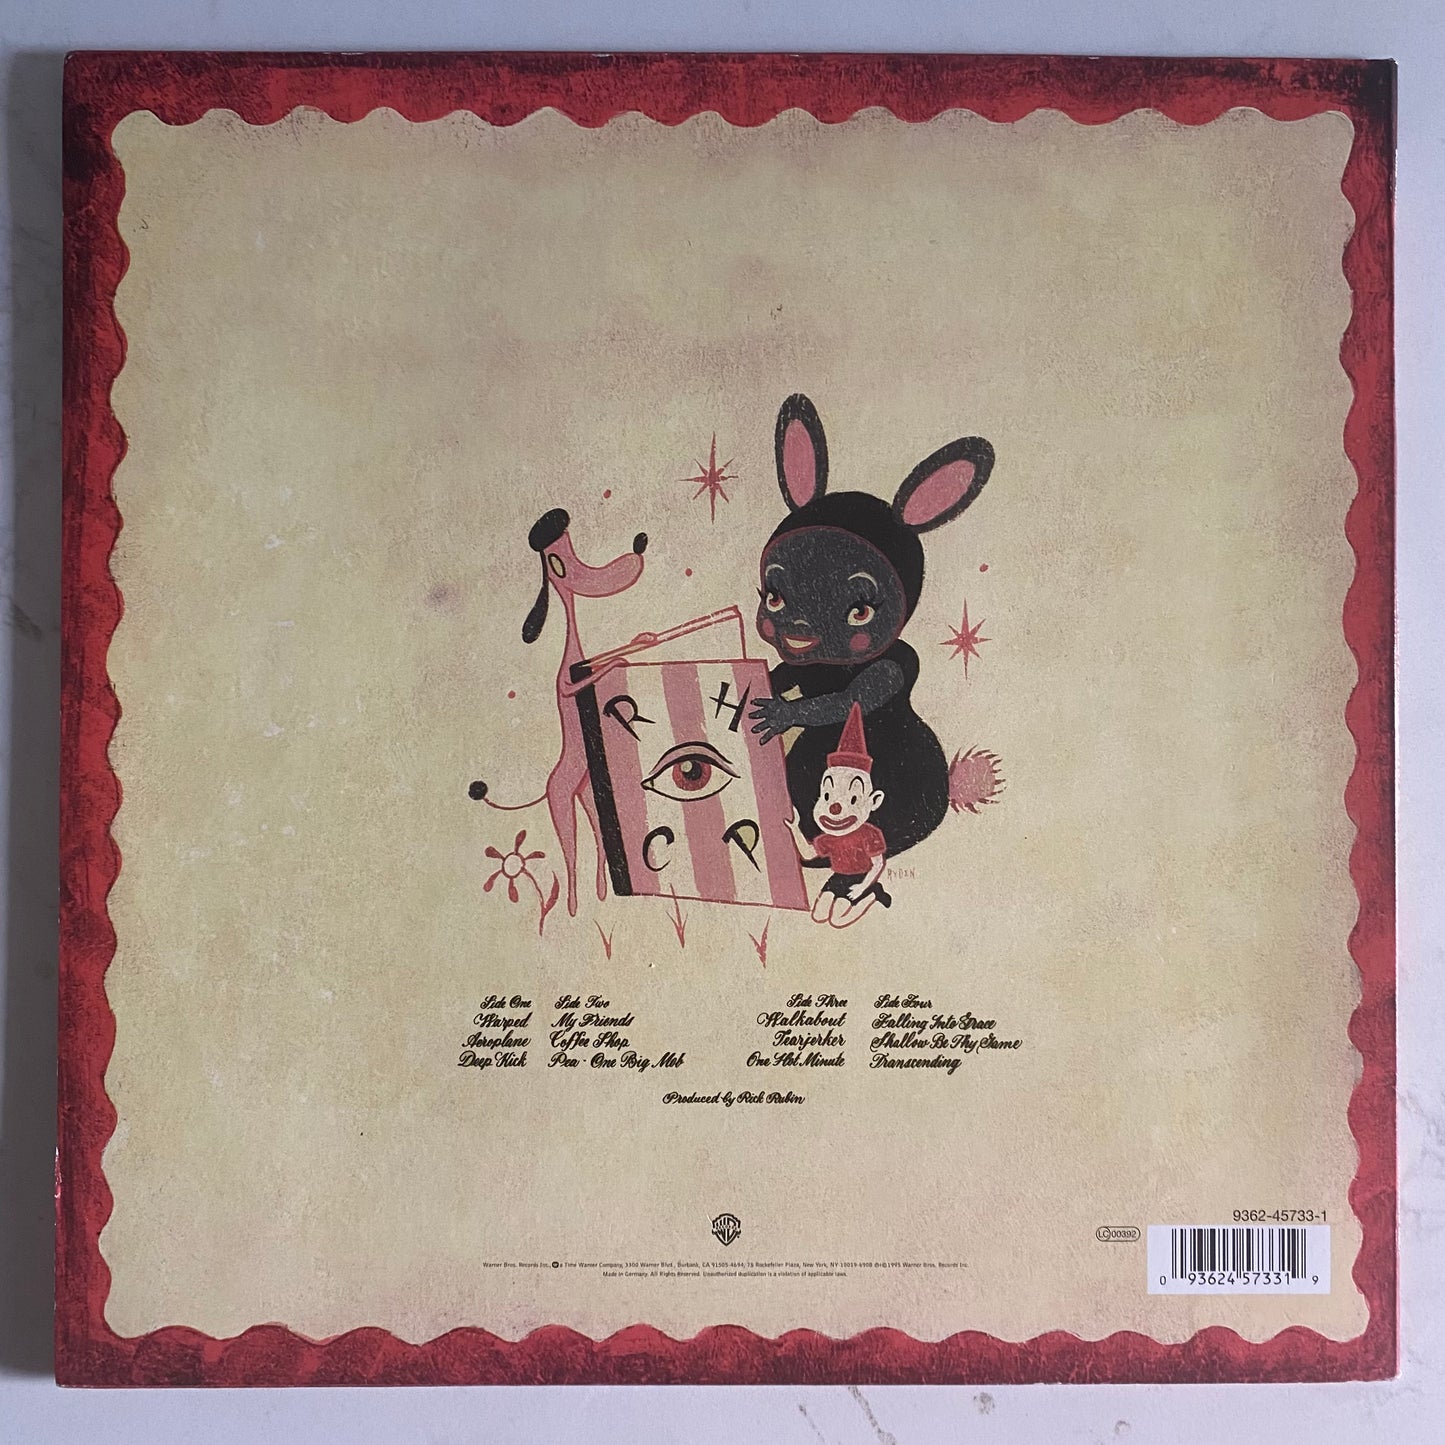 The Red Hot Chili Peppers* - One Hot Minute (2xLP, Album, Dlx, RE, 180). ROCK